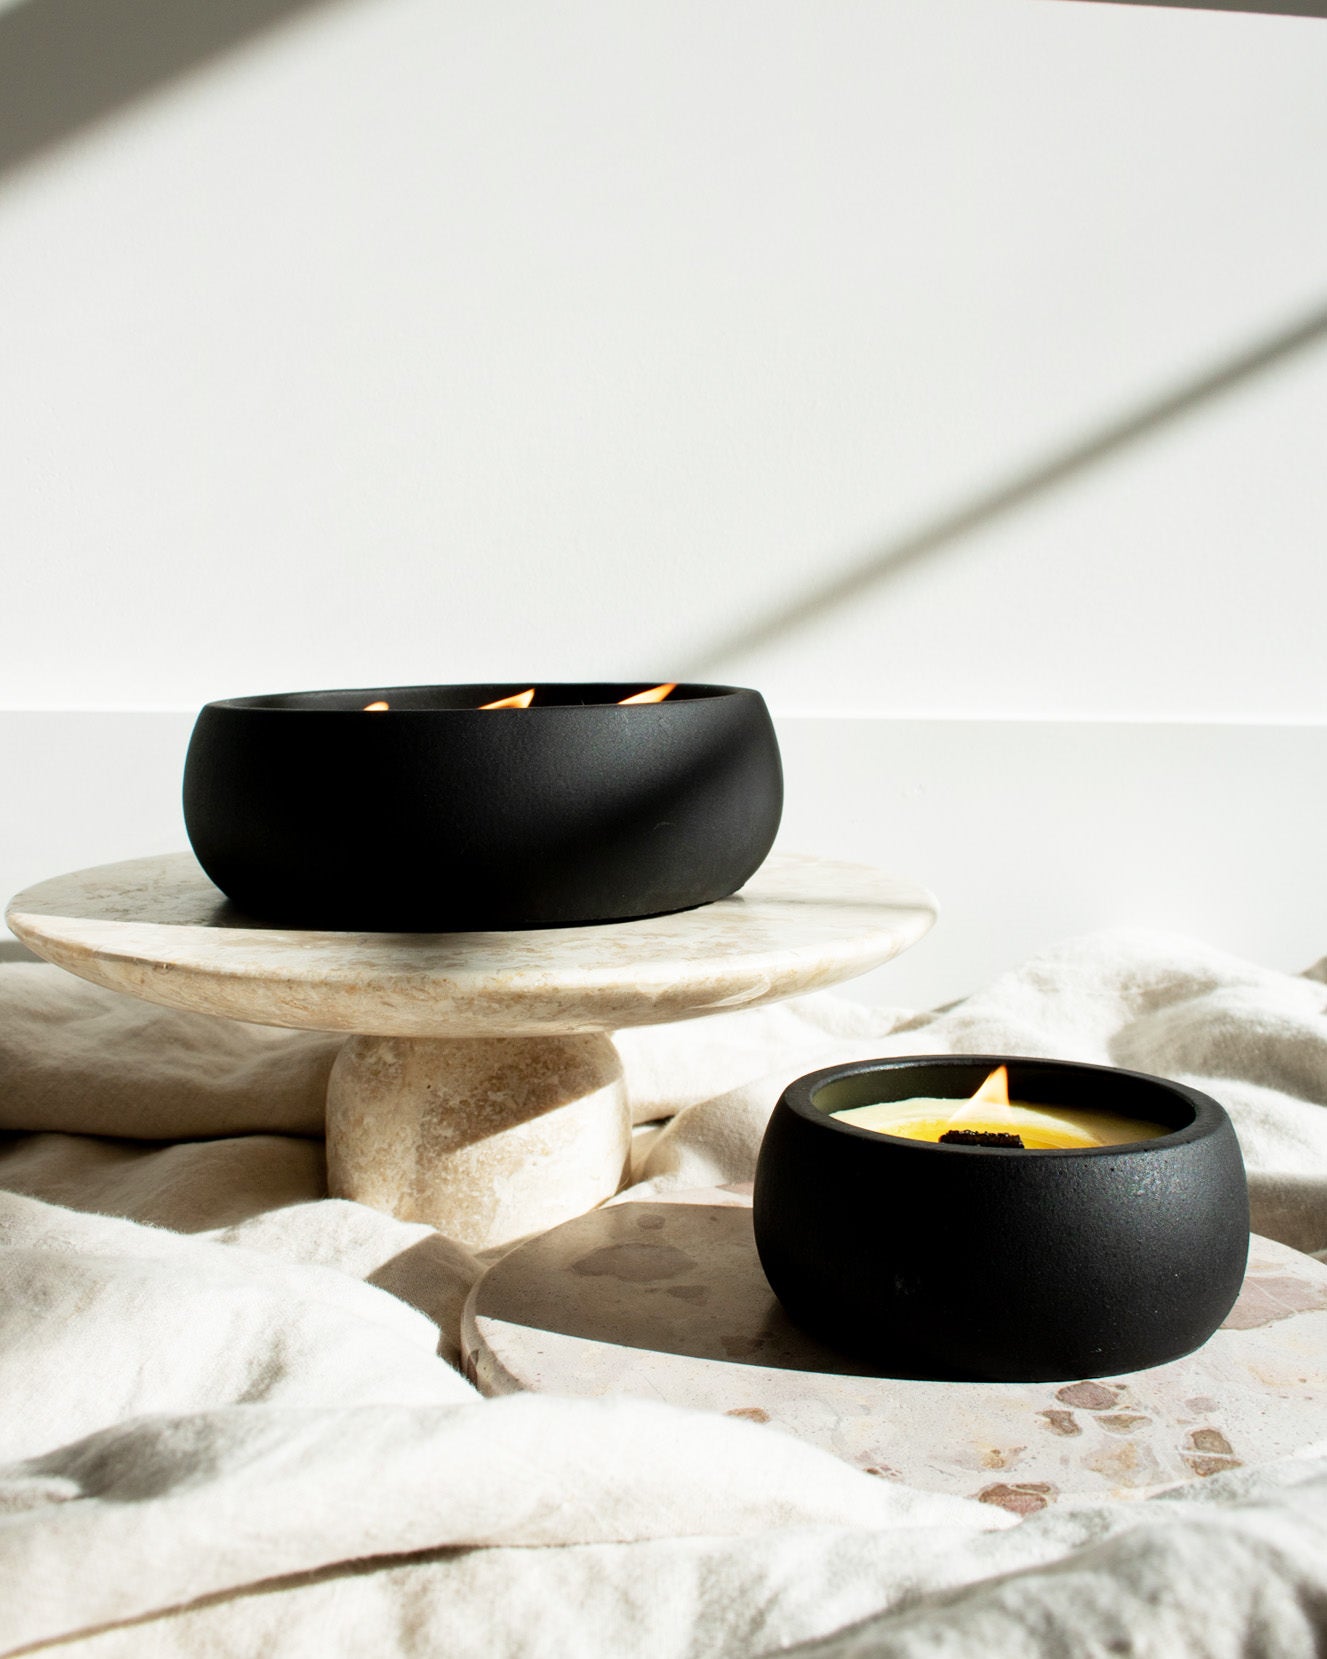 Live By The Sun Black Coconut Soy Candle - Black Concrete Wooden Wick Vessel